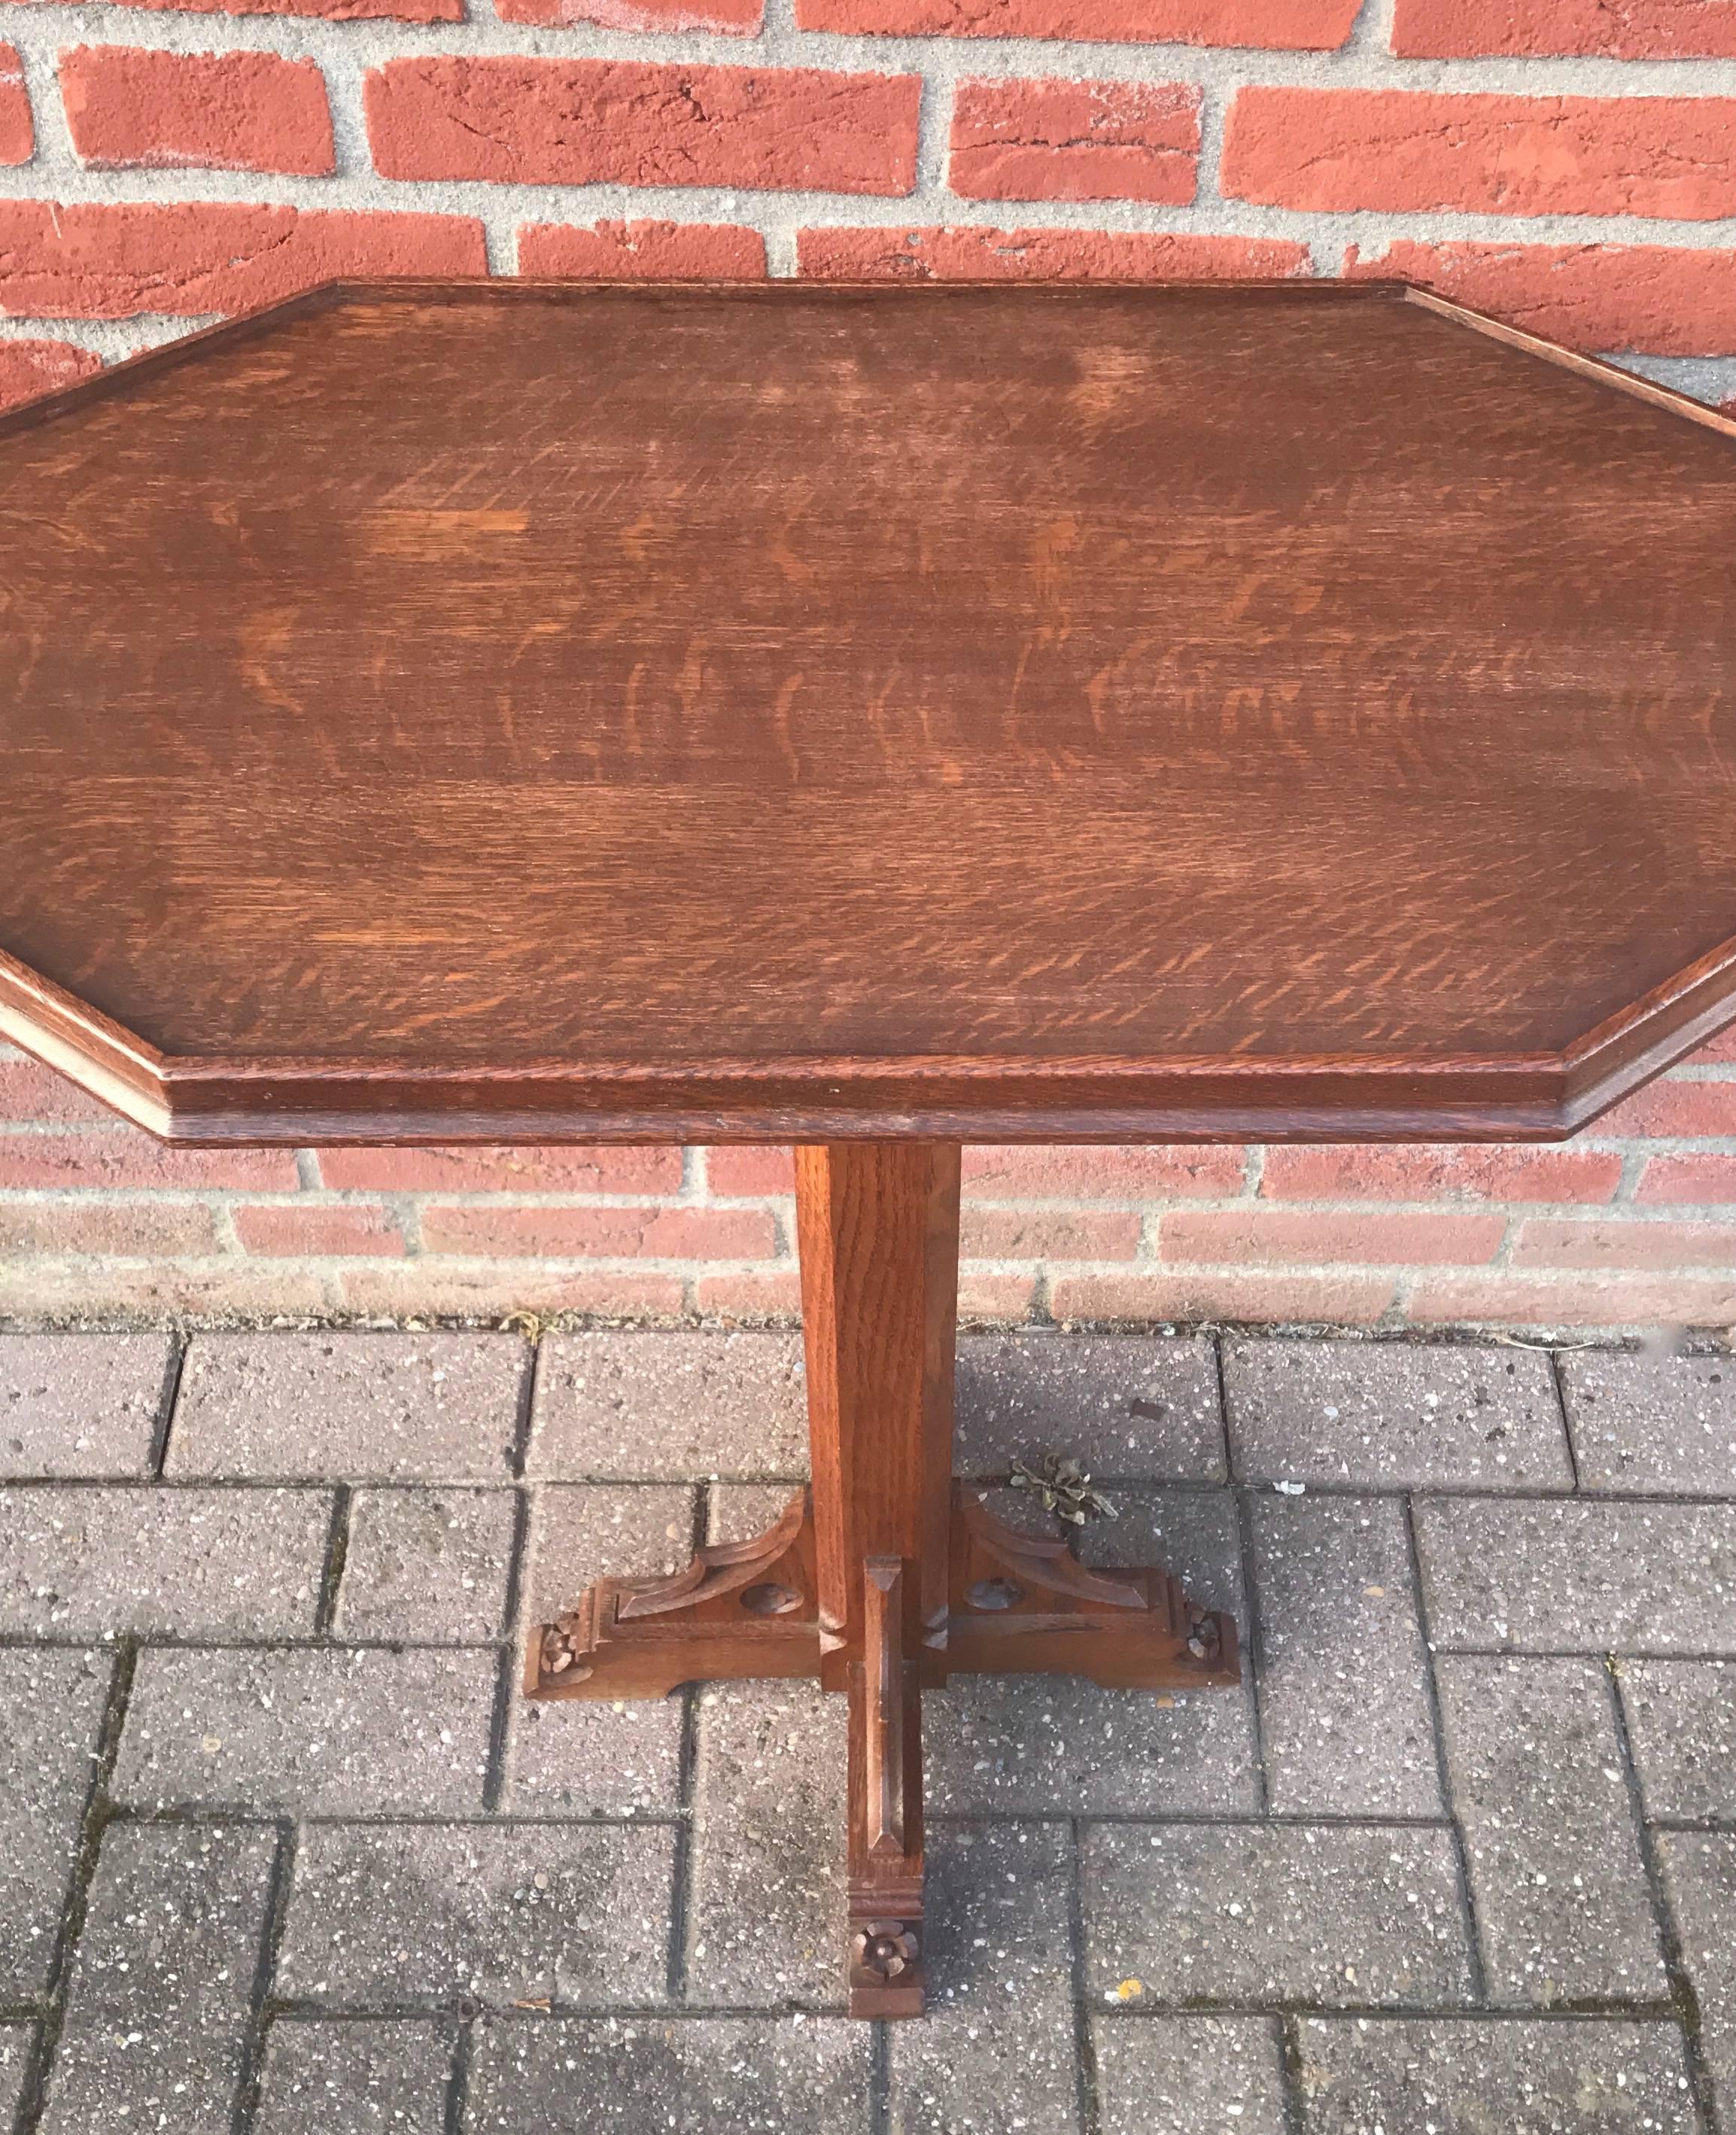 Beautiful design and practical size Gothic Revival table or stand.

This wonderful and all handcrafted, Gothic Revival table is in perfect condition. Thanks to its practical size this stunning church table can be used for all kinds of purposes. It